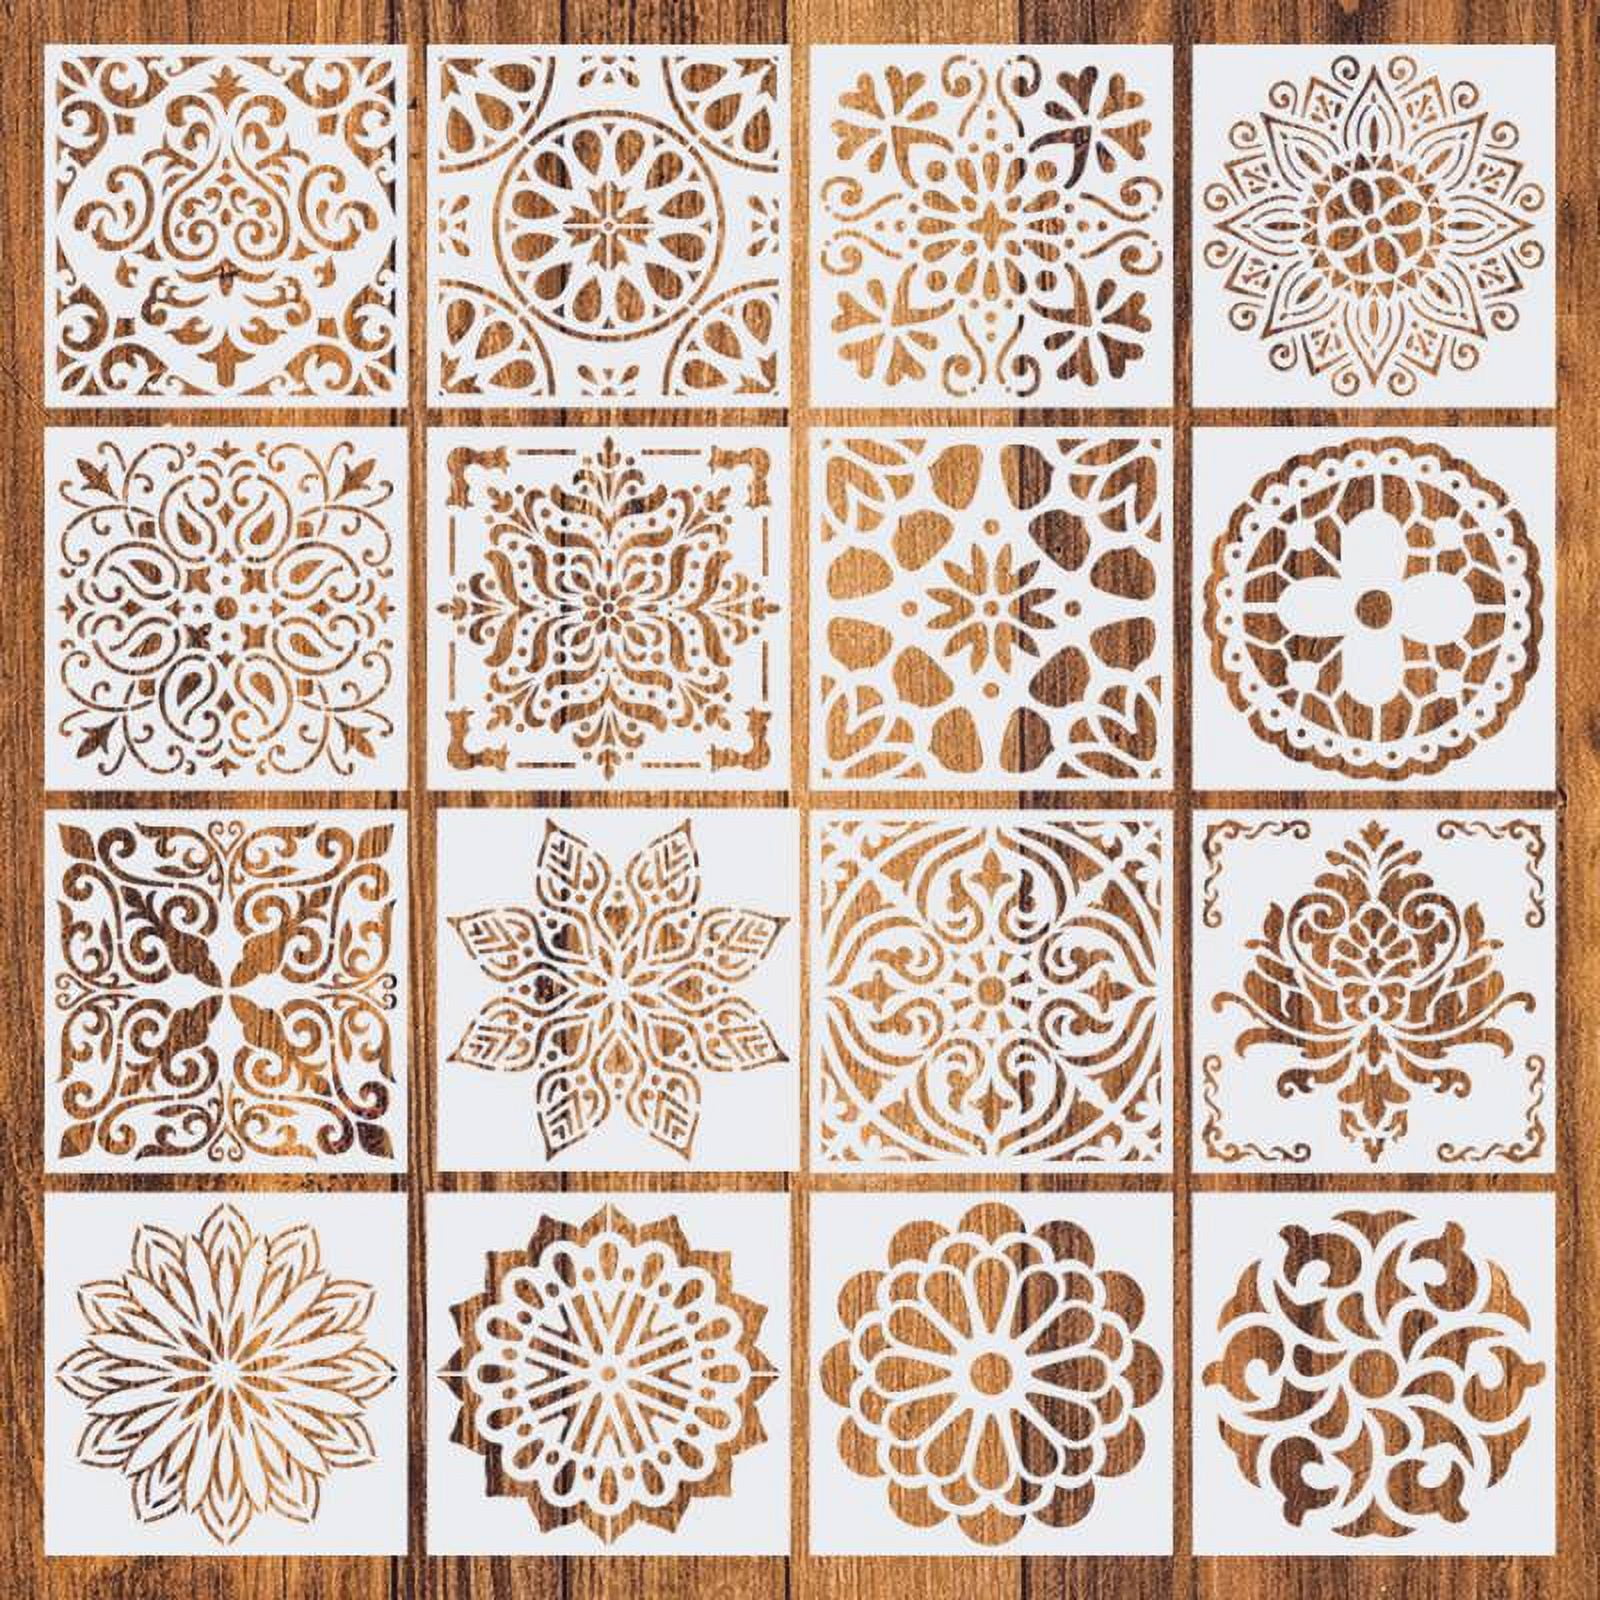  Teling 32 Pcs 6 x 6 Inch Mandala Stencils for Painting Reusable  Mandala Dot Painting Templates for DIY Painting Art Projects Floor Wall  Tile Fabric Wood Canvas Decor : Arts, Crafts & Sewing